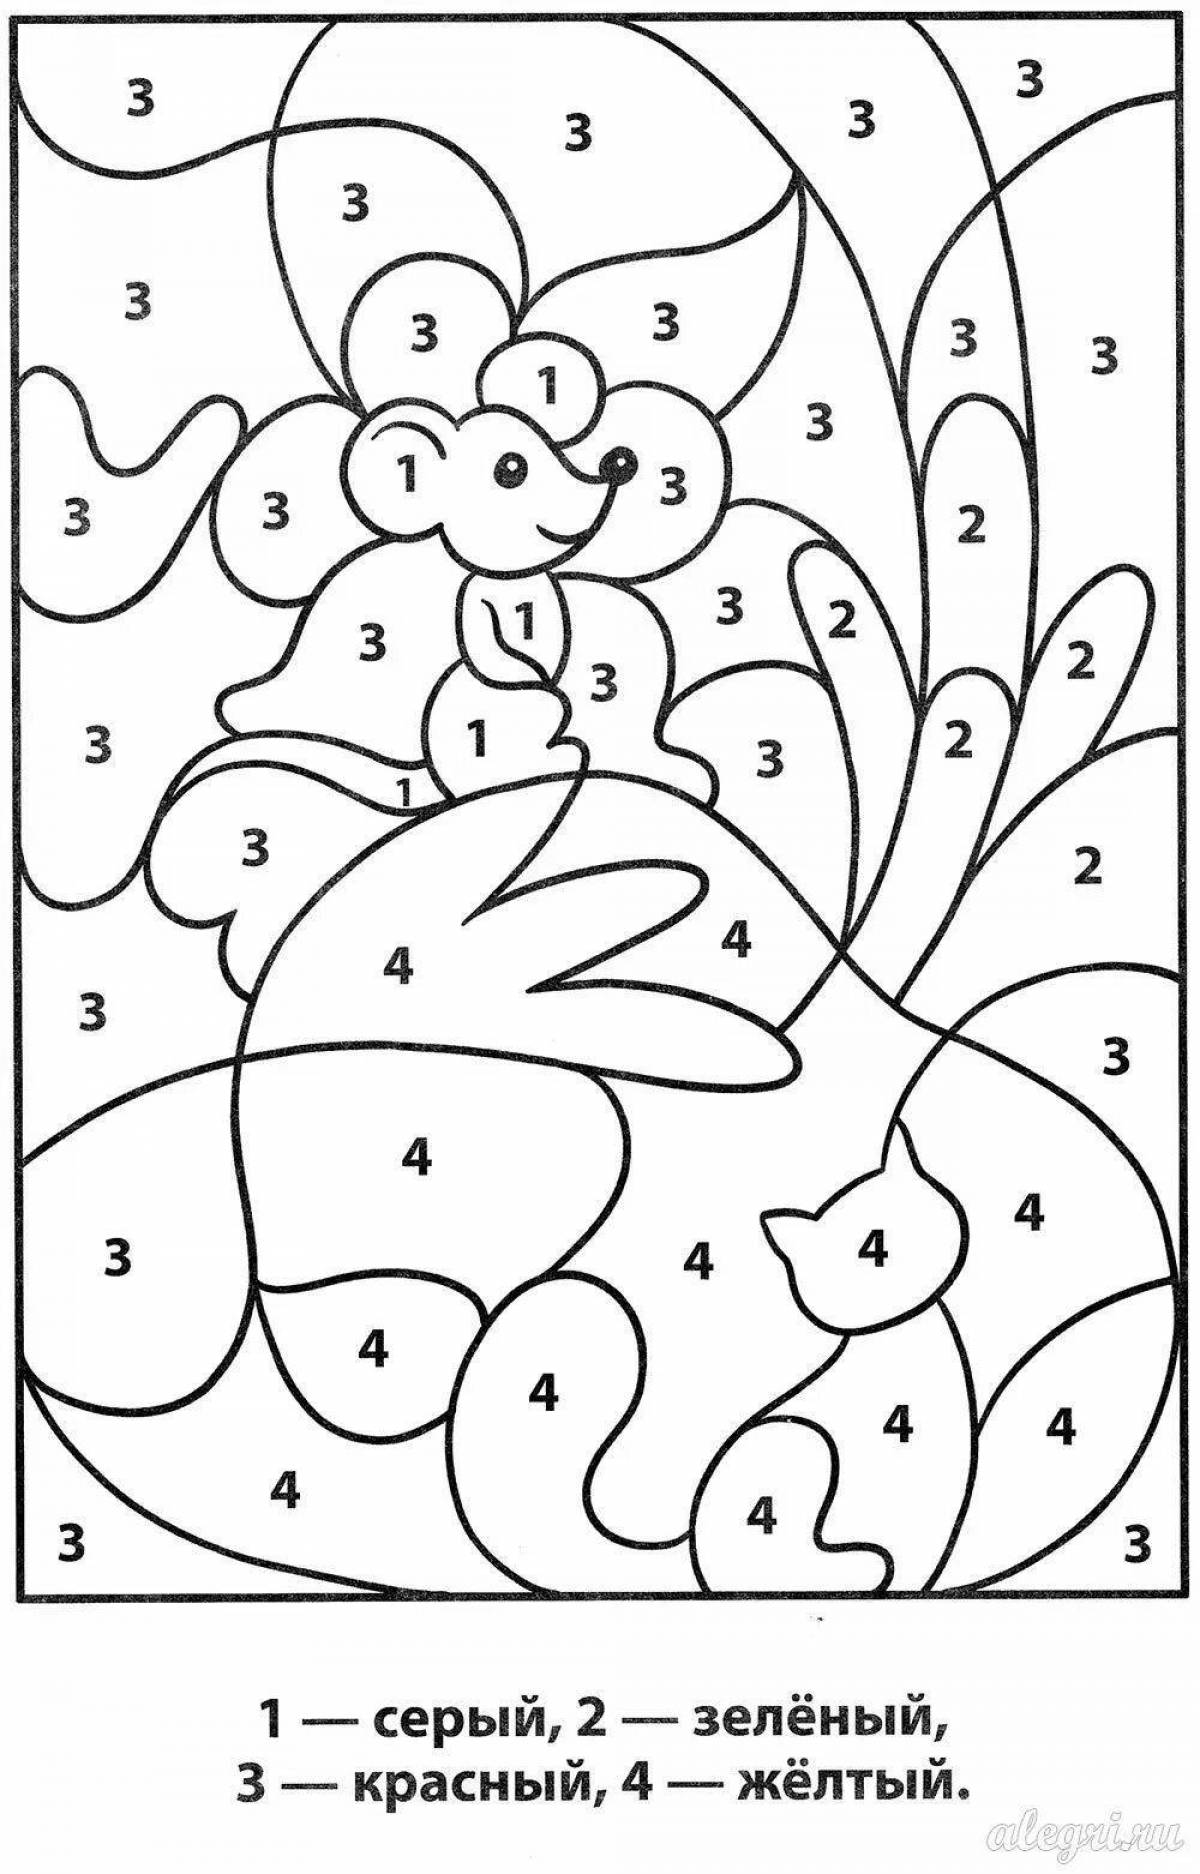 Attractive coloring with small numbers